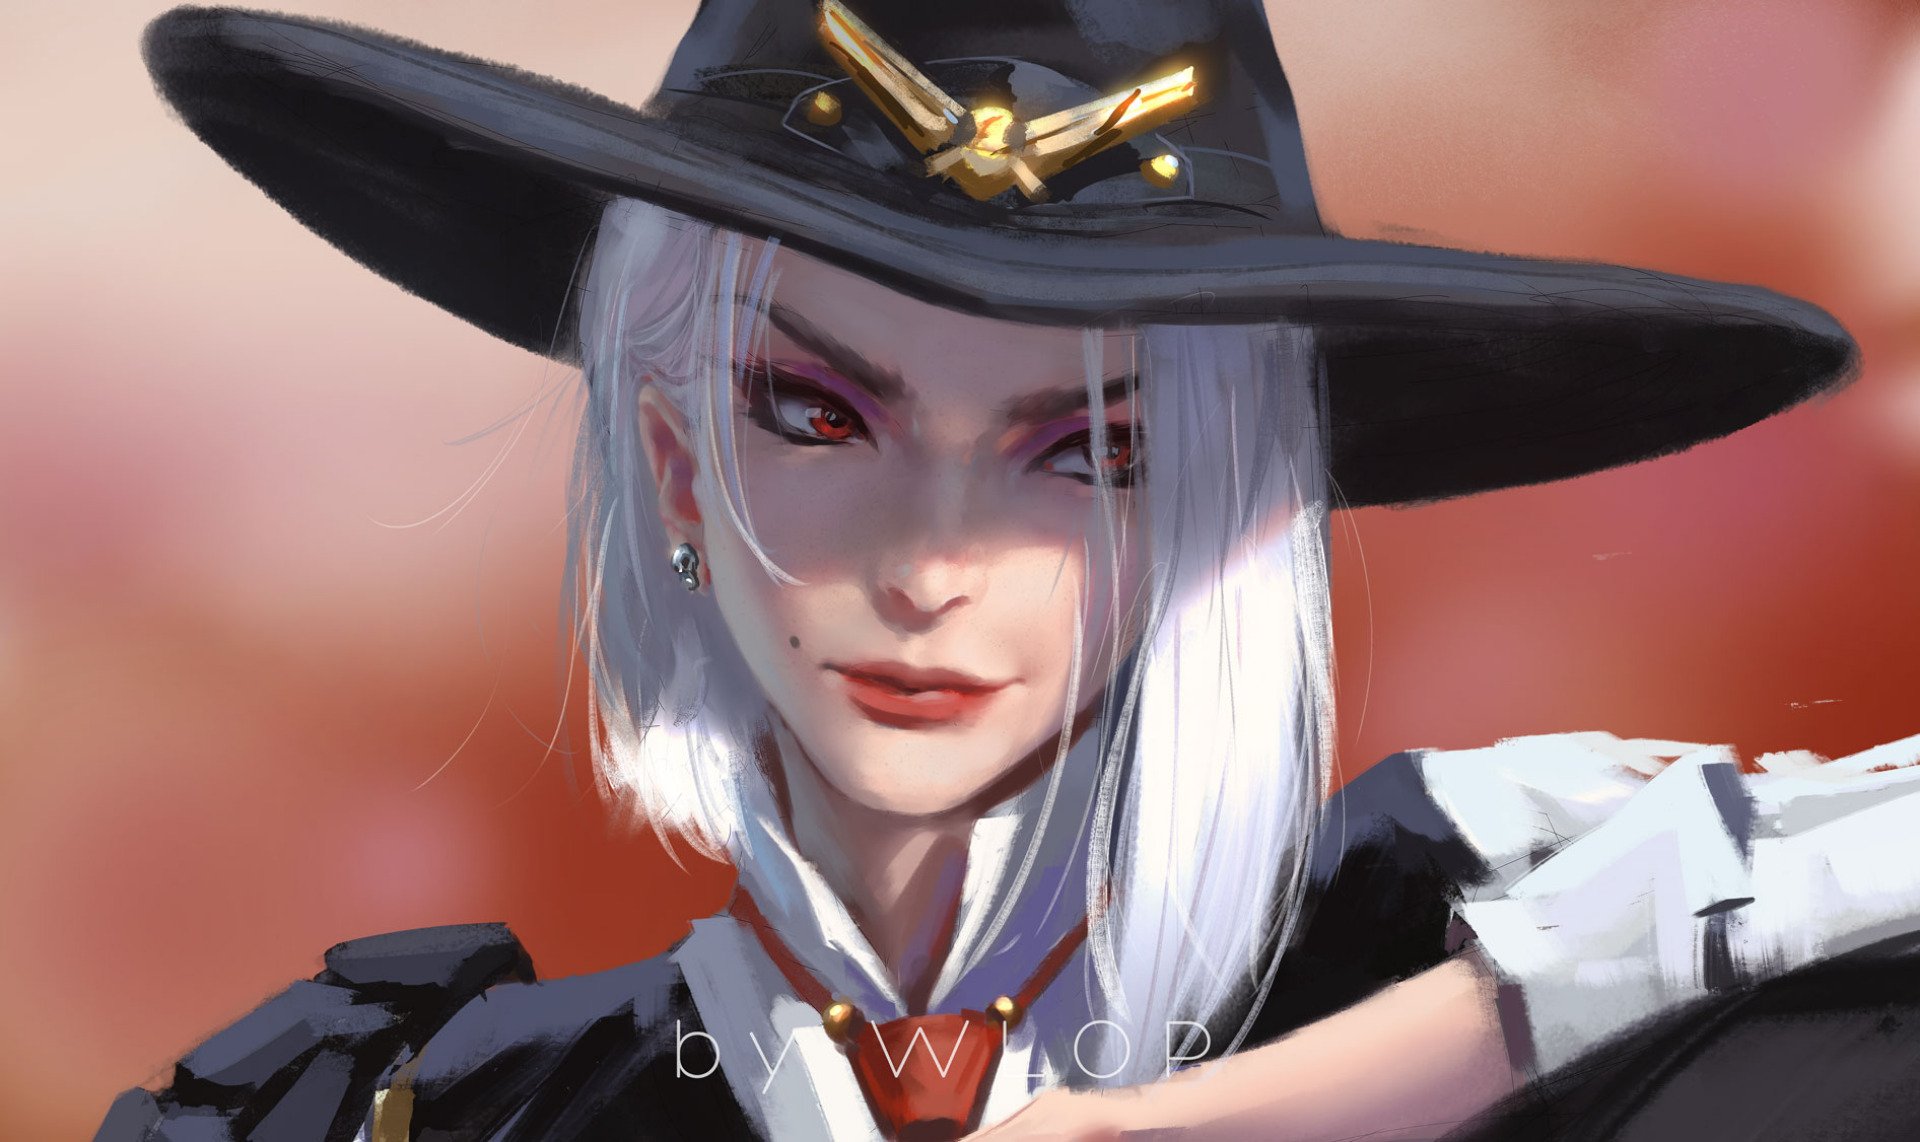 High Def Ashe Overwatch Wallpaper By Wang Ling 9087